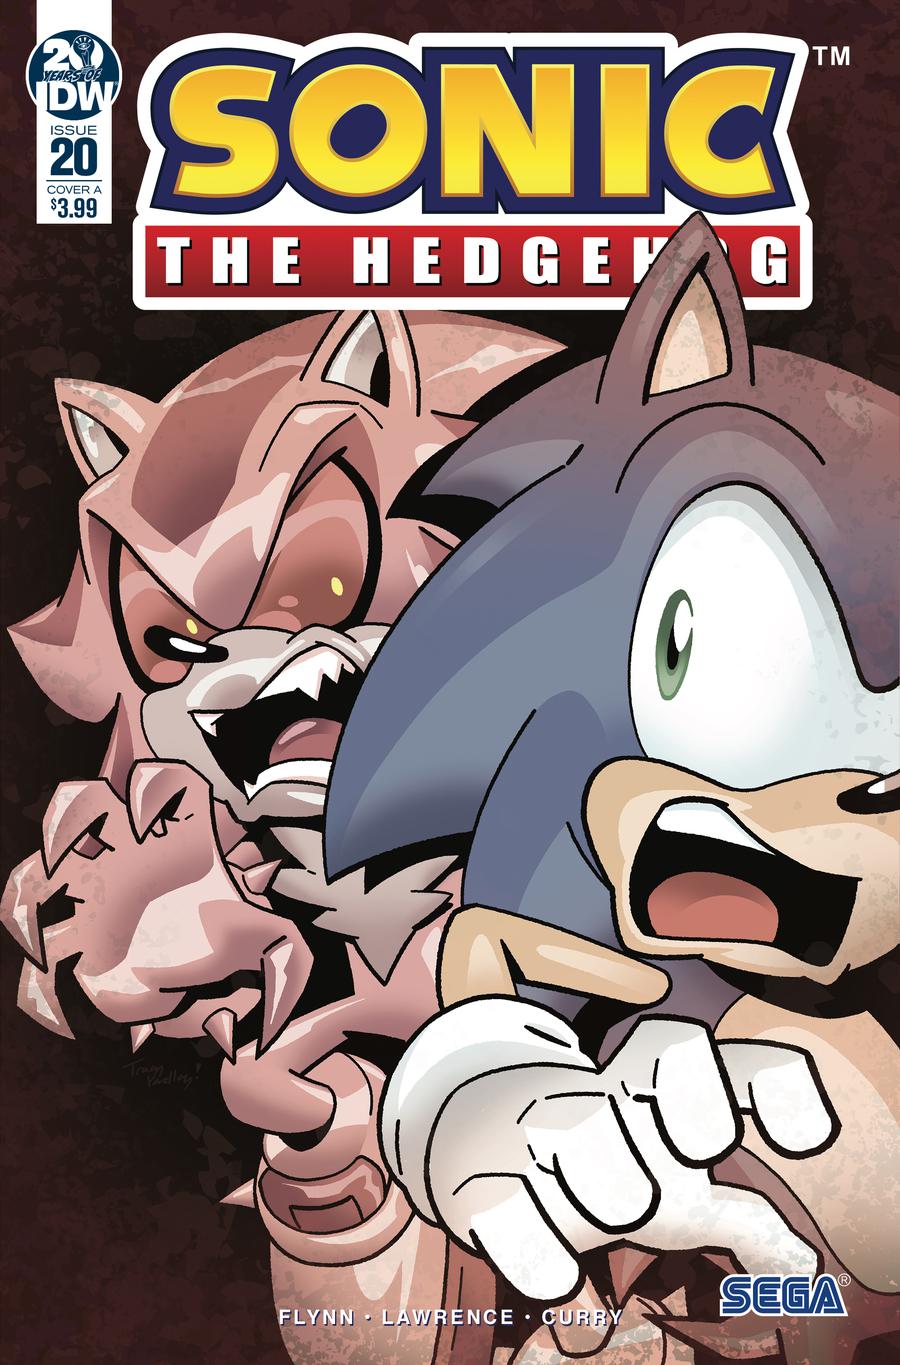 Sonic The Hedgehog Vol 3 #20 Cover A Regular Tracy Yardley Cover